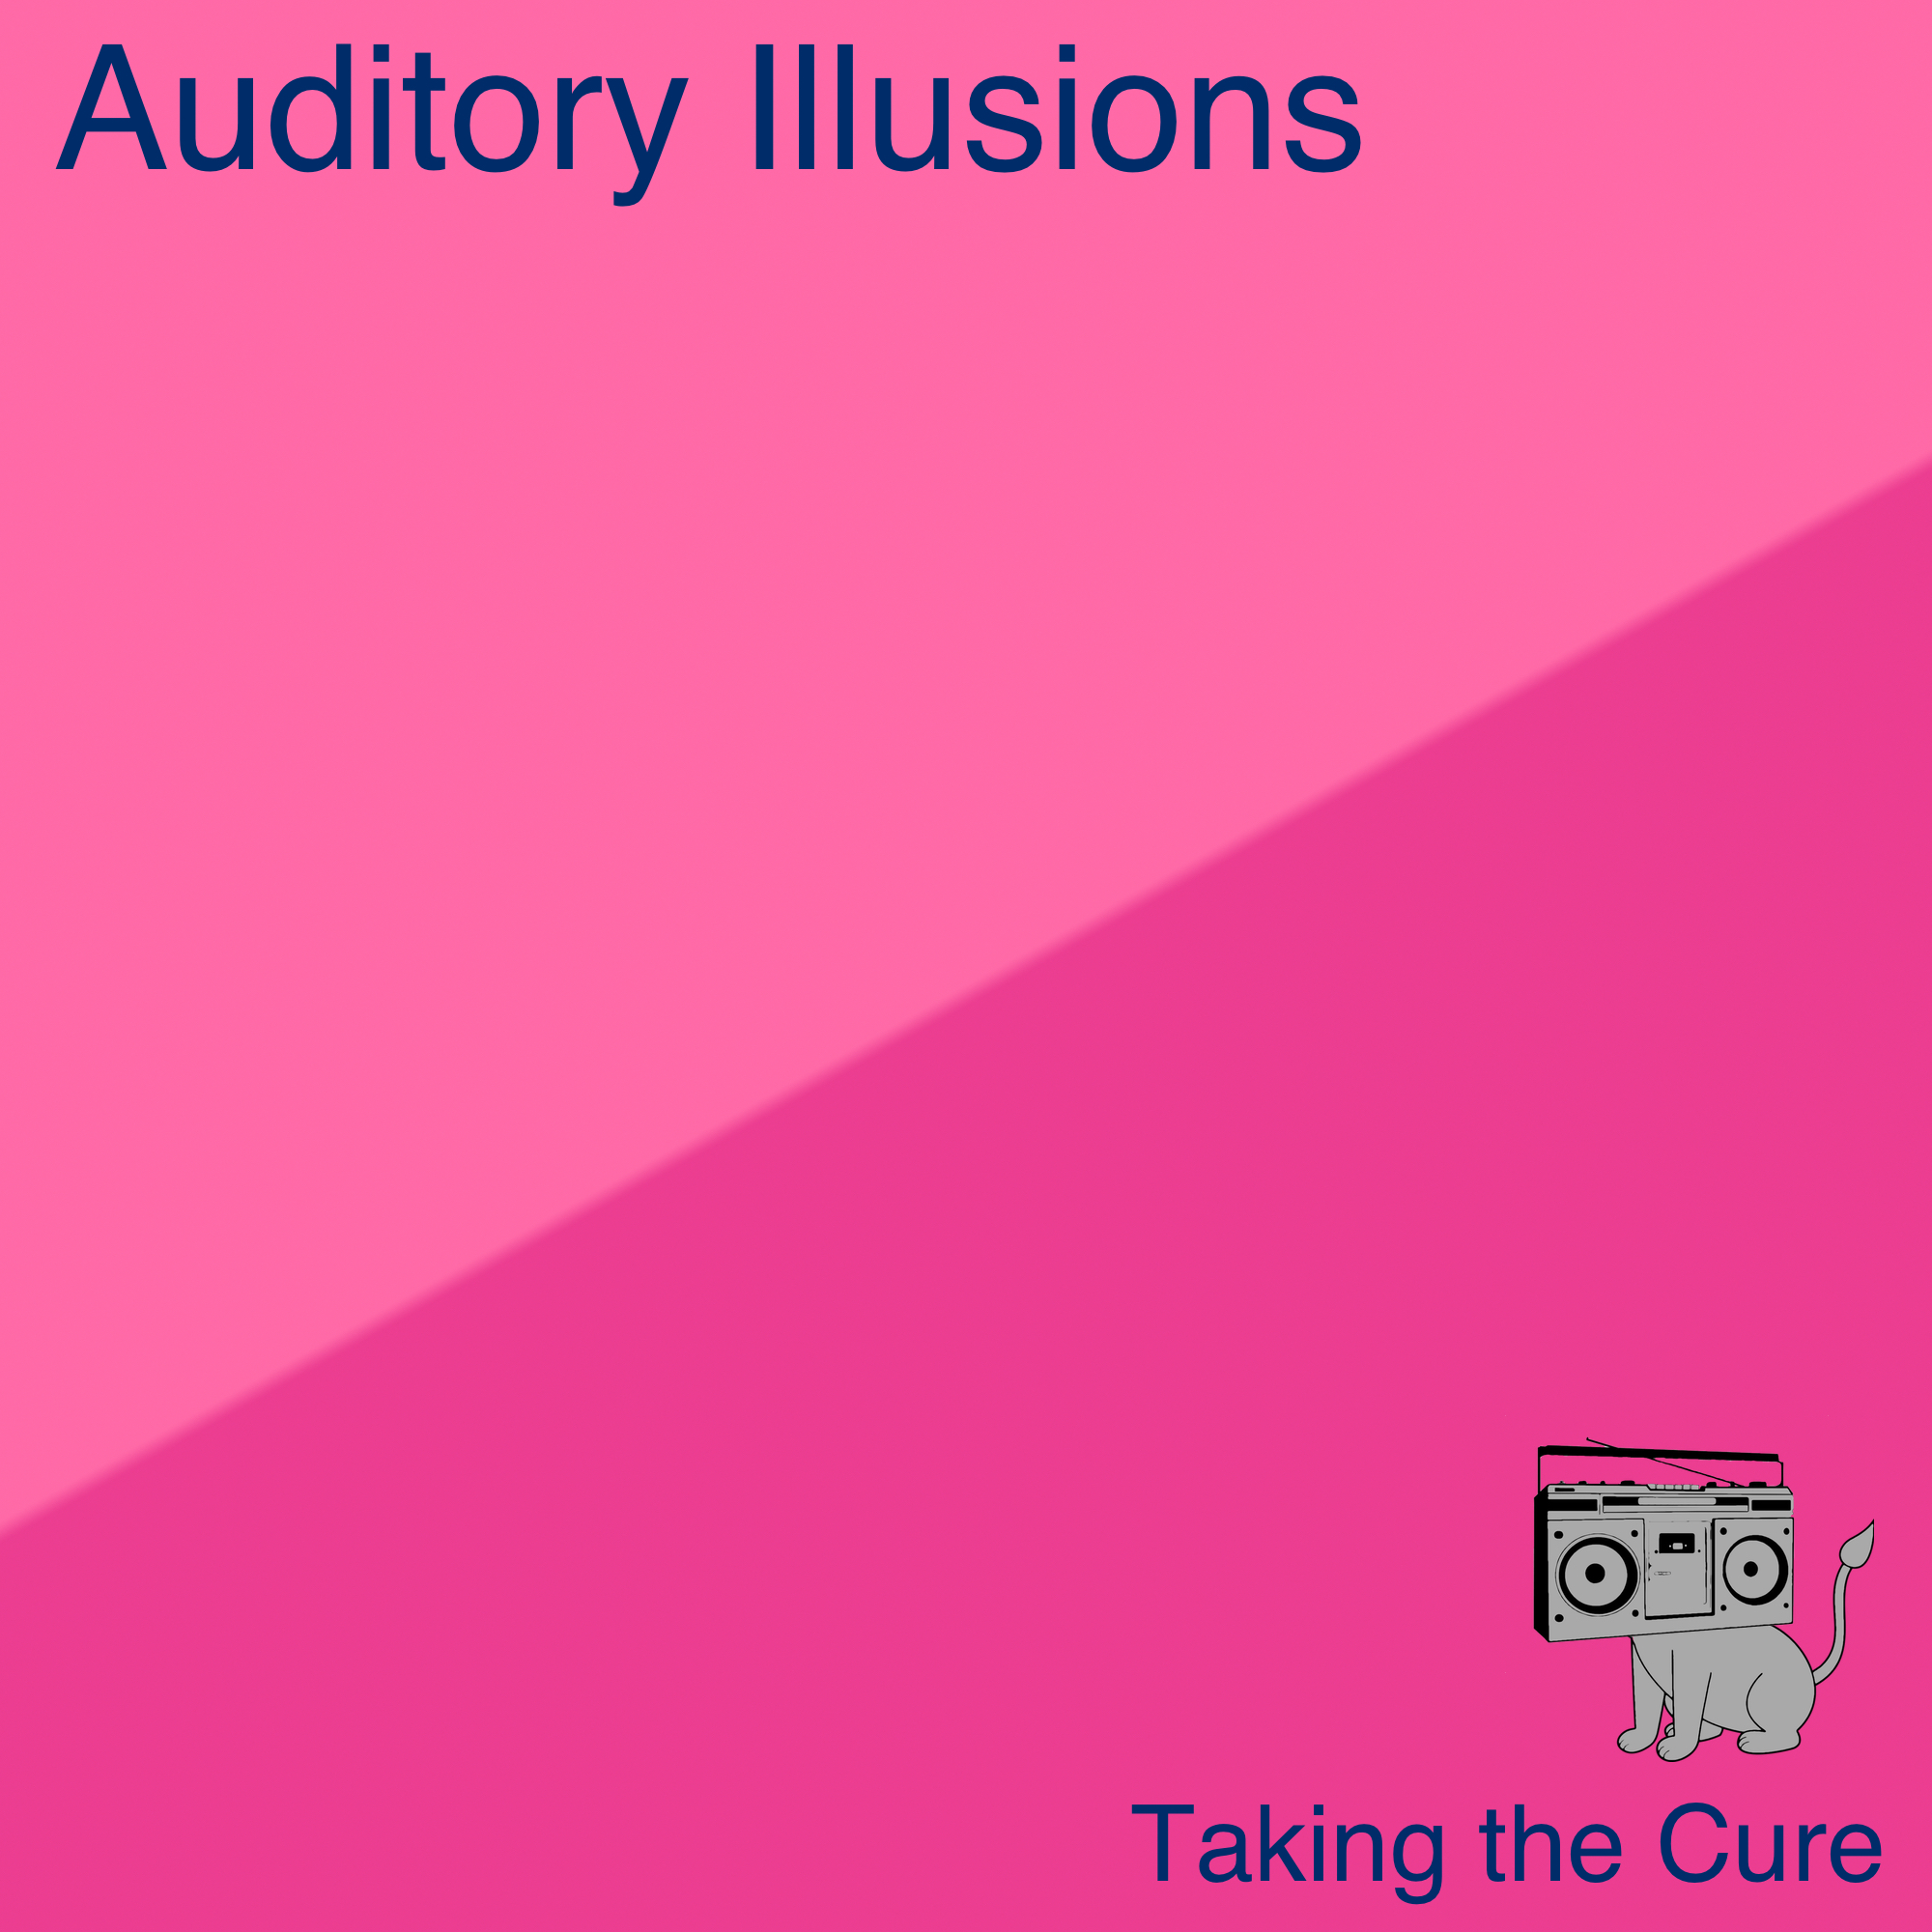 list of auditory illusions